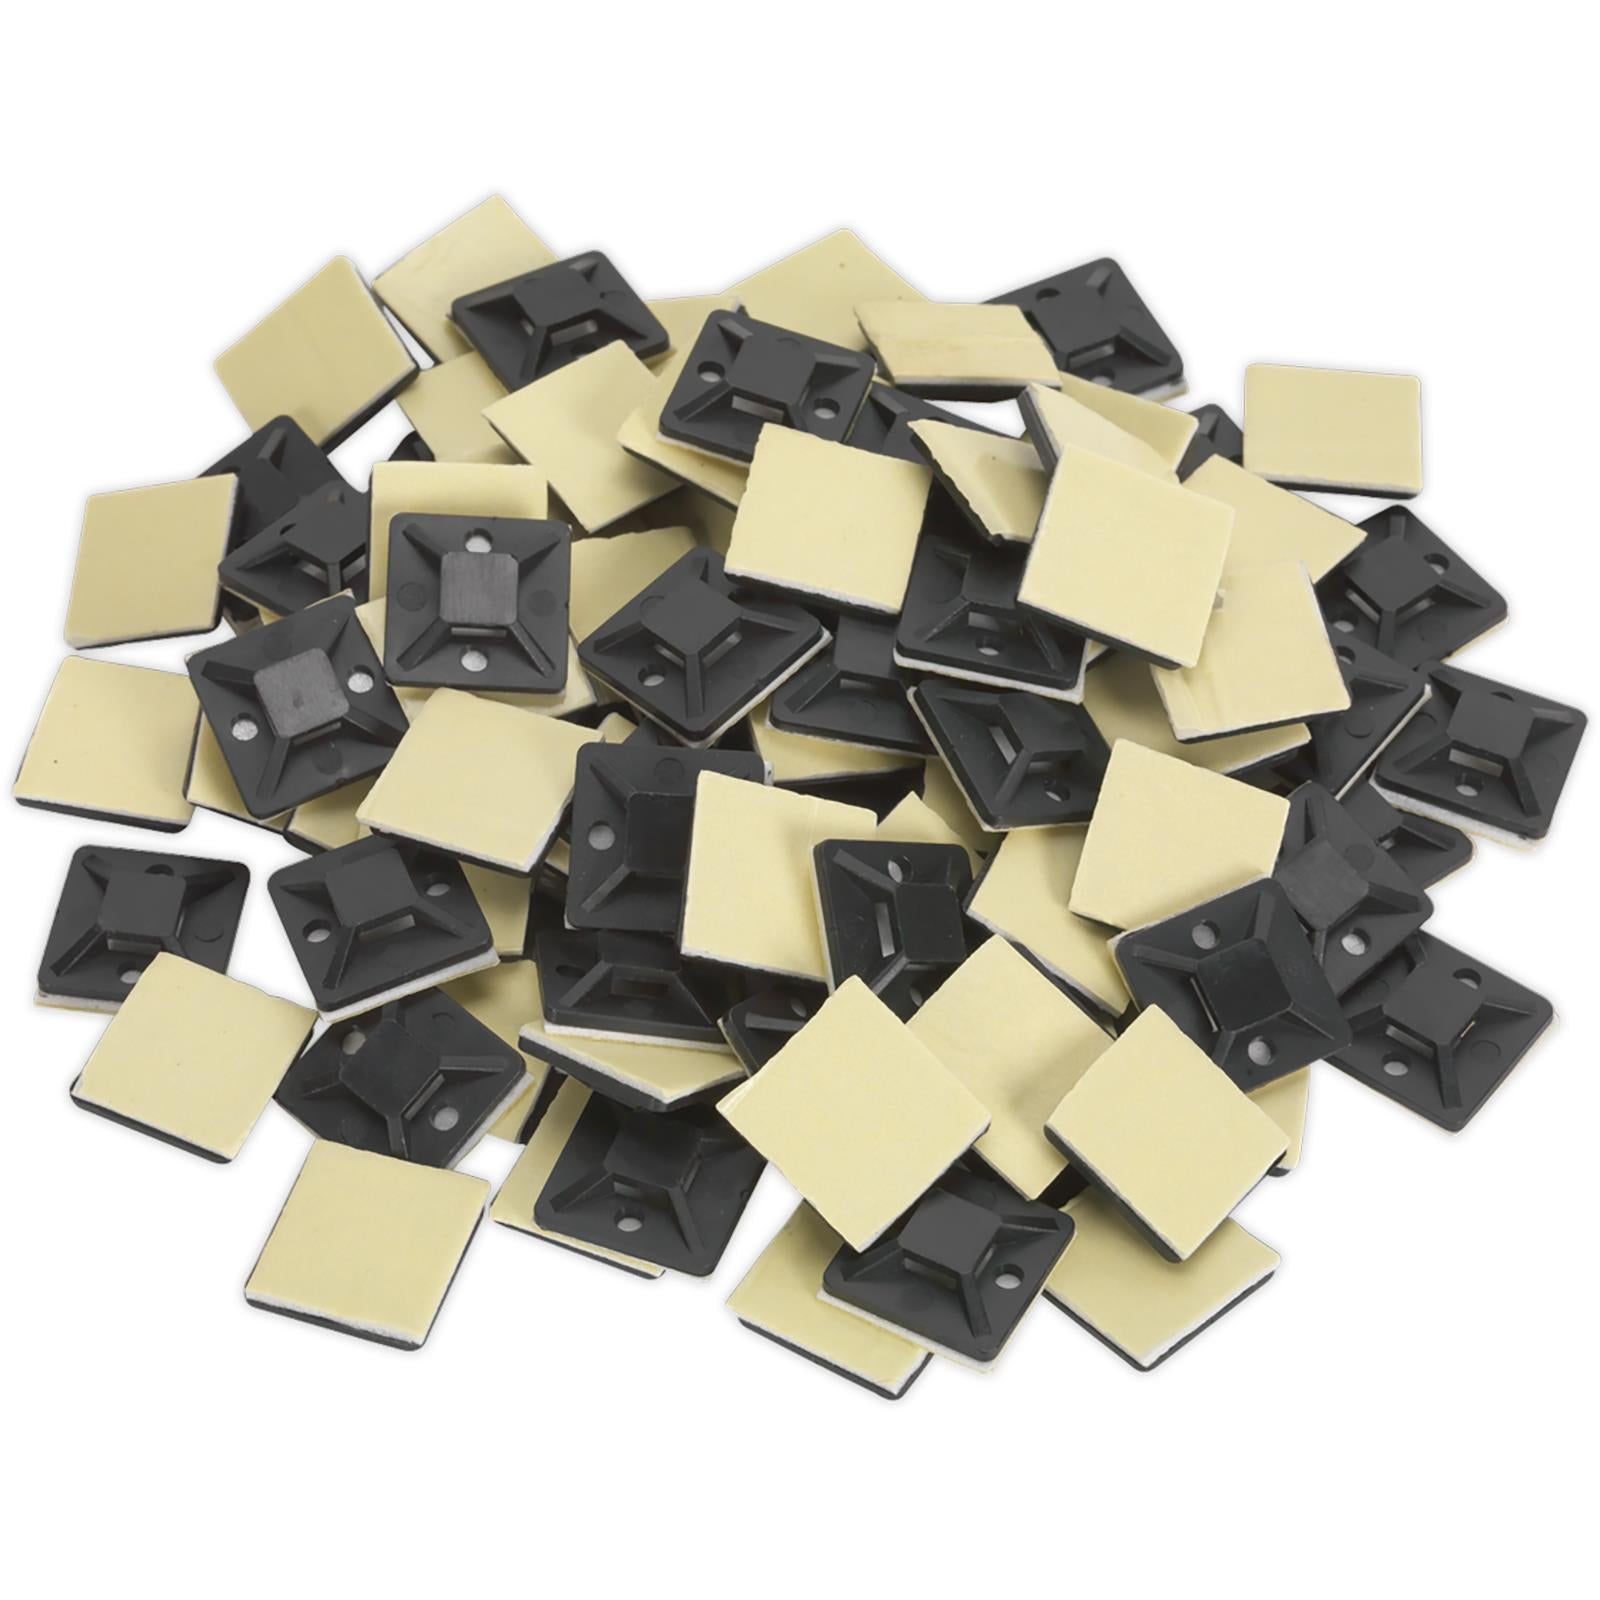 Sealey Cable Tie Mount Self Adhesive 20 x 20mm Black Pack of 100